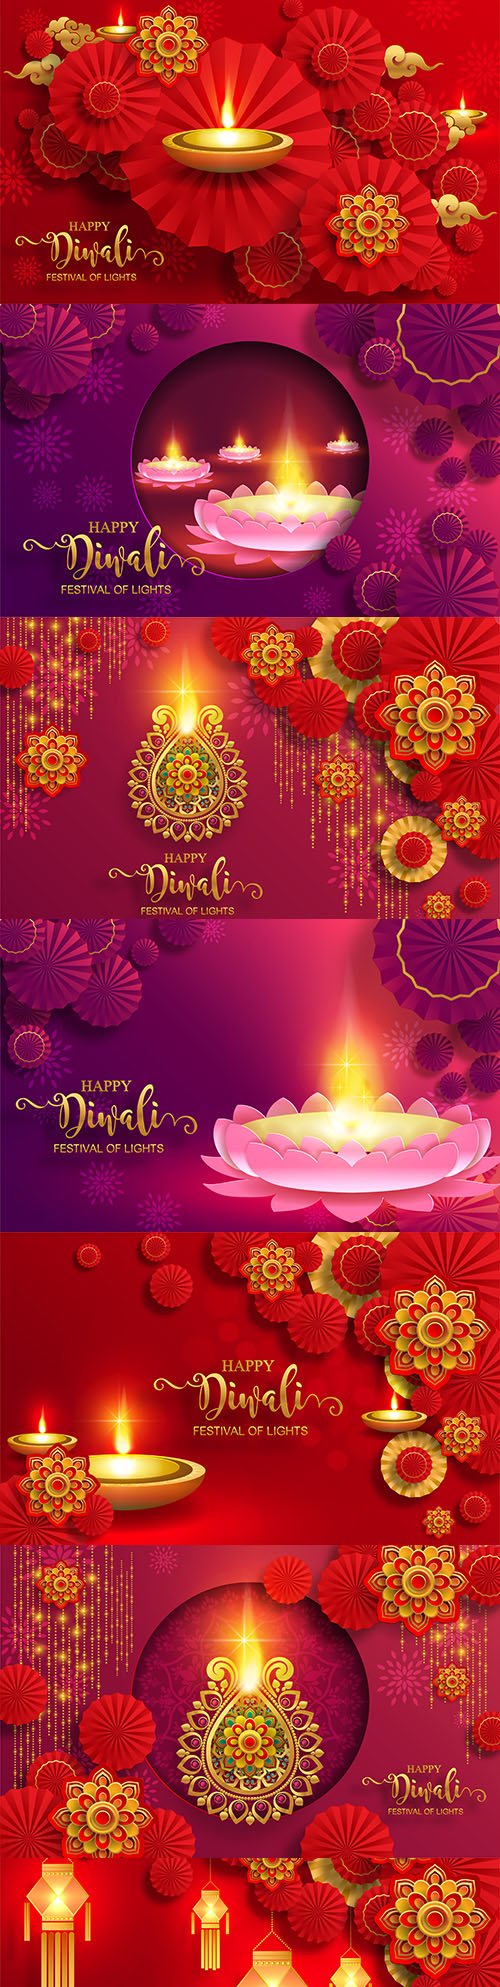 Divali, dipavali festival of lights India with gold drawing 2